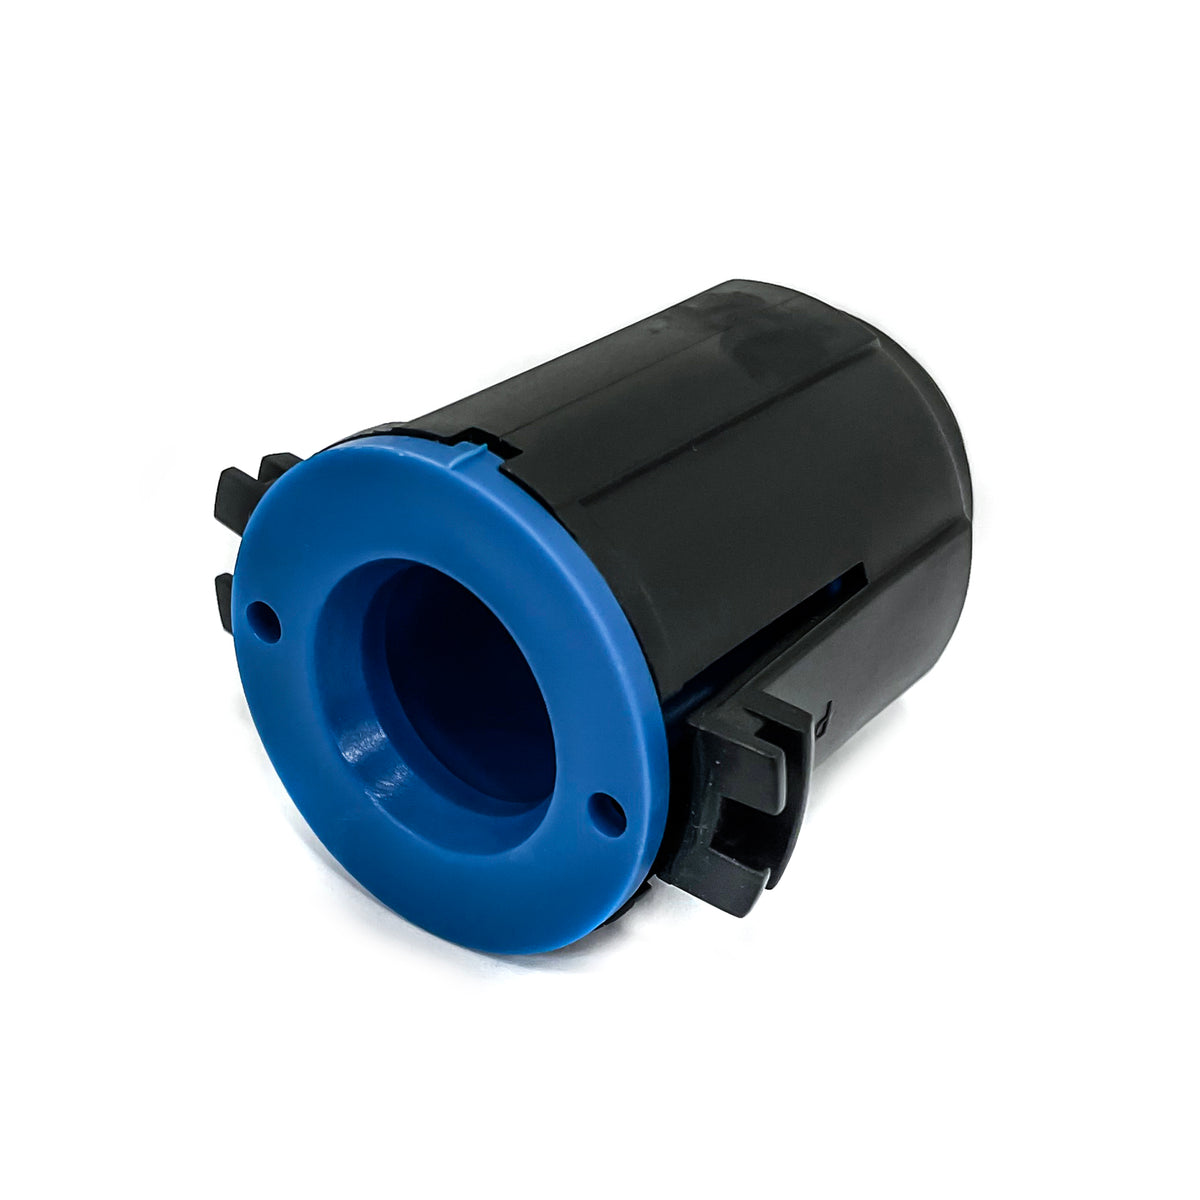 MAGNETIC ADAPTER FOR INSTALLATION IN ADBLUE FILTER